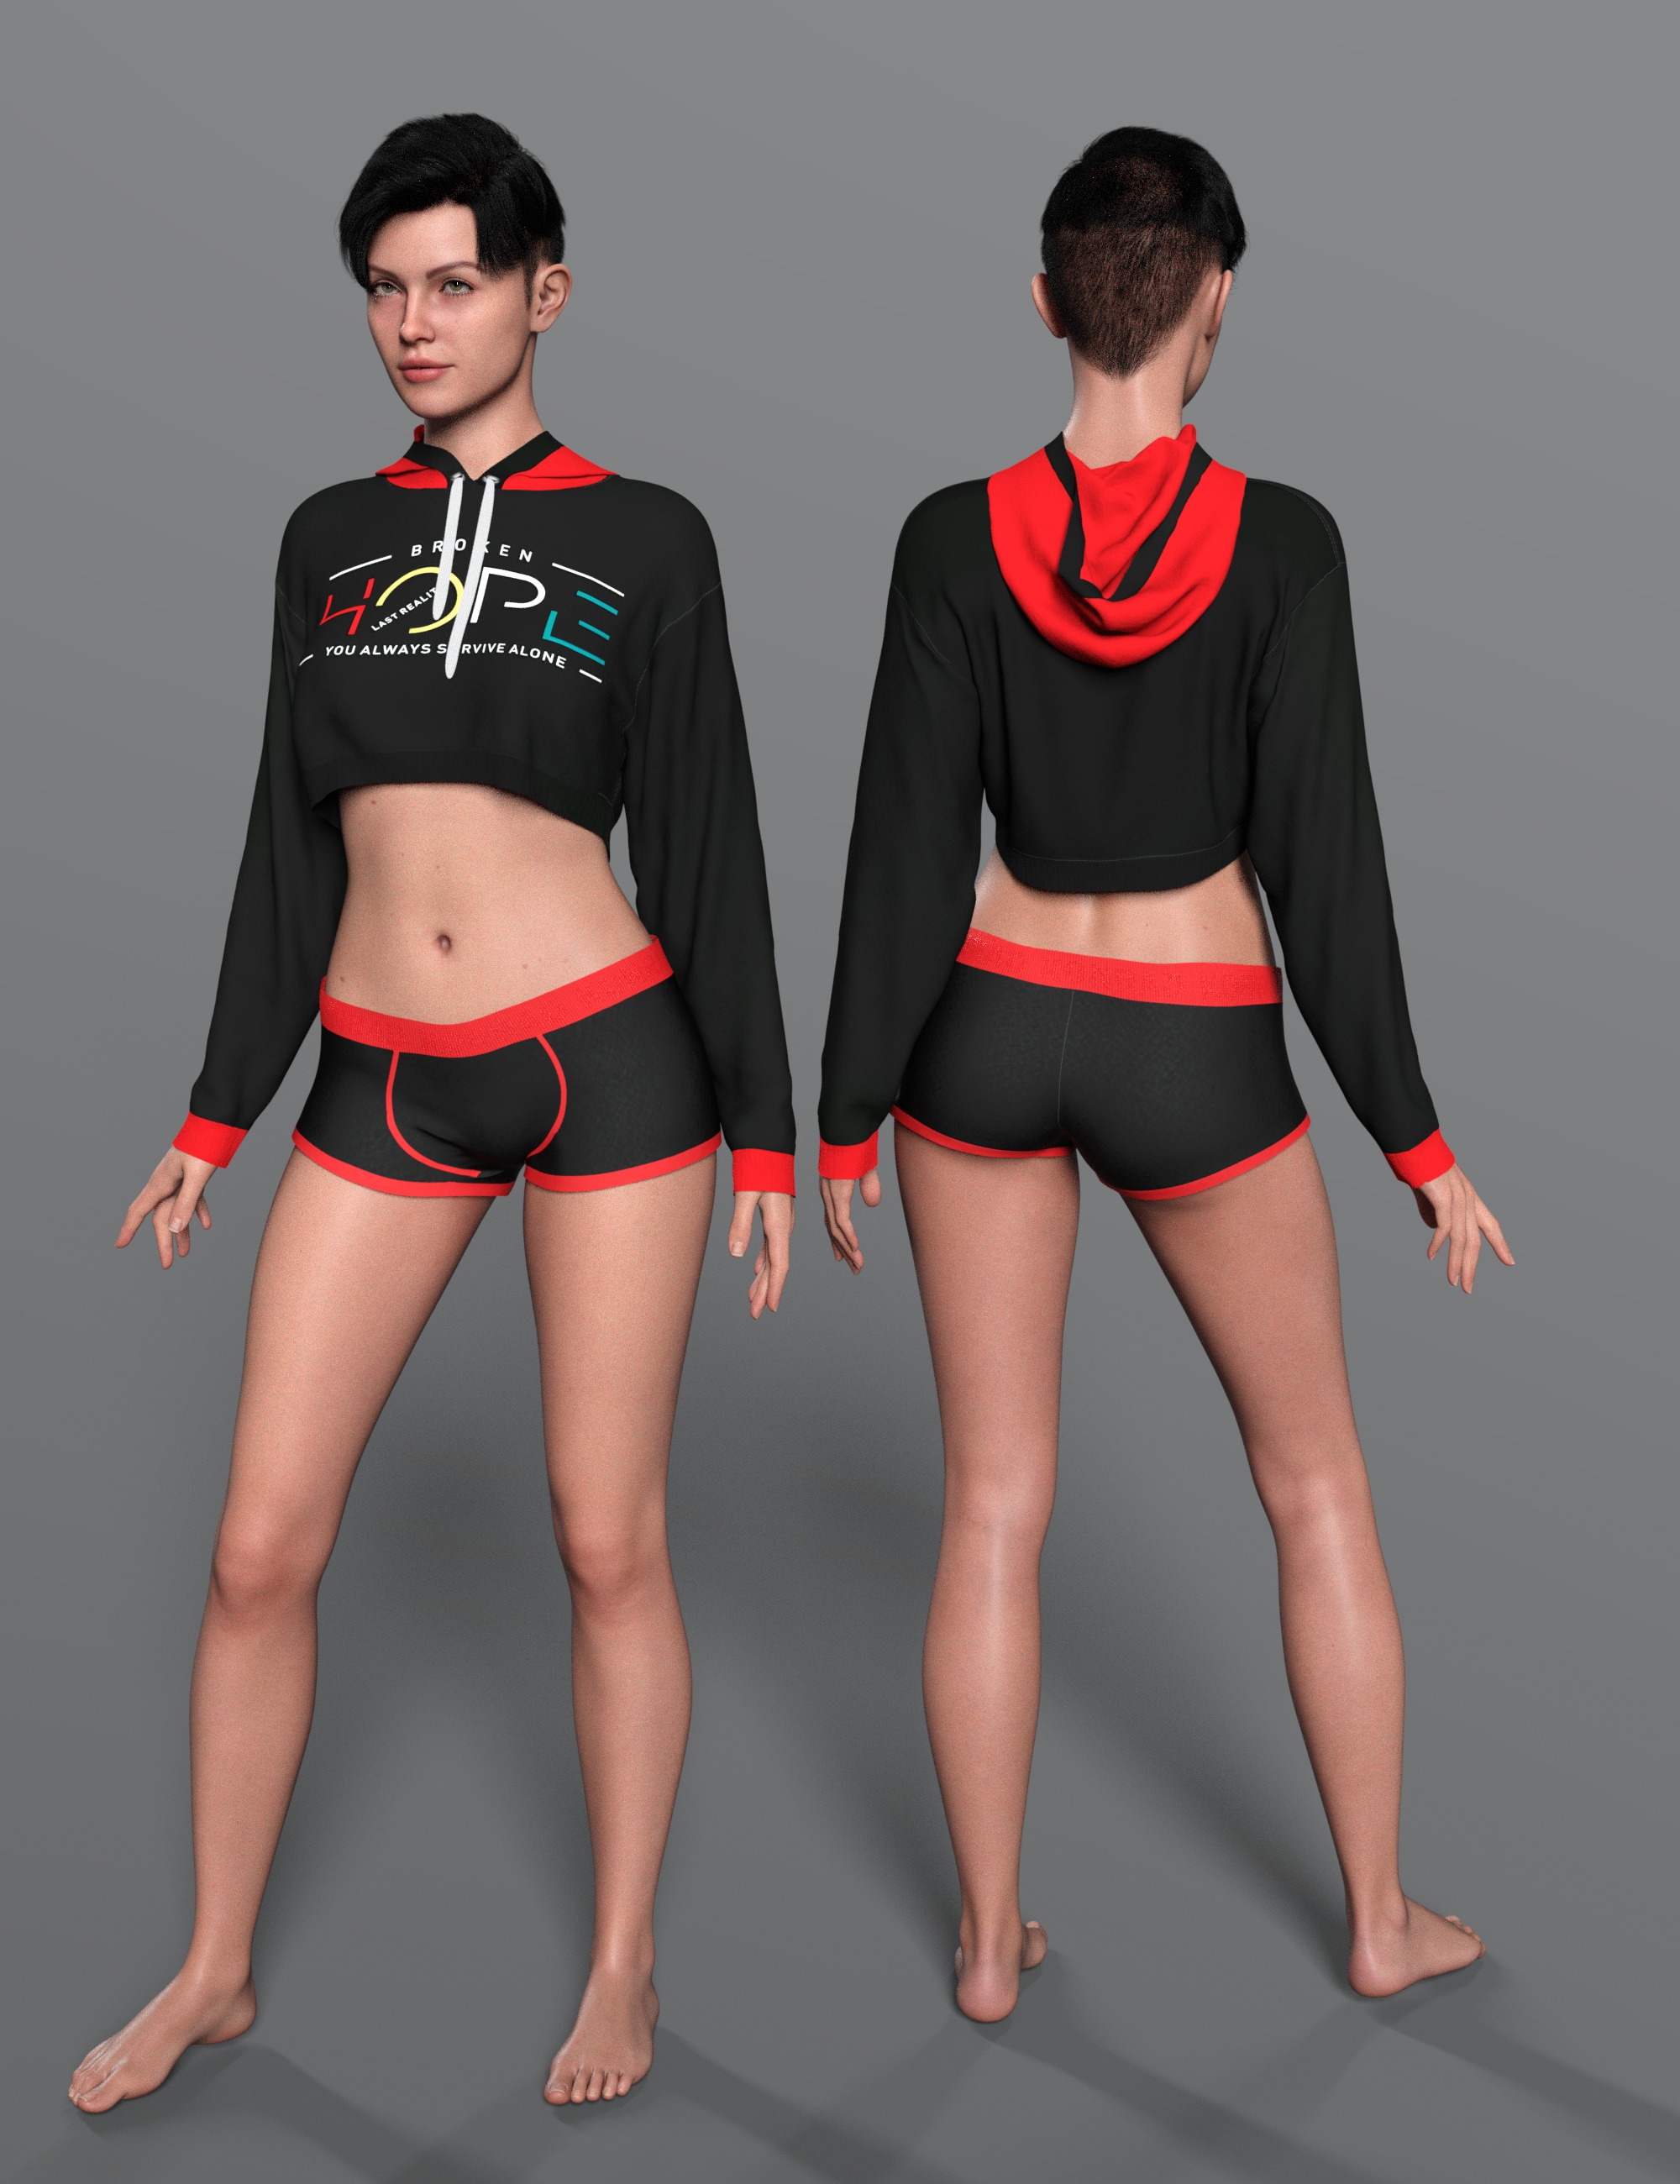 Mixable Hoodies for Genesis 9 by: Sade, 3D Models by Daz 3D